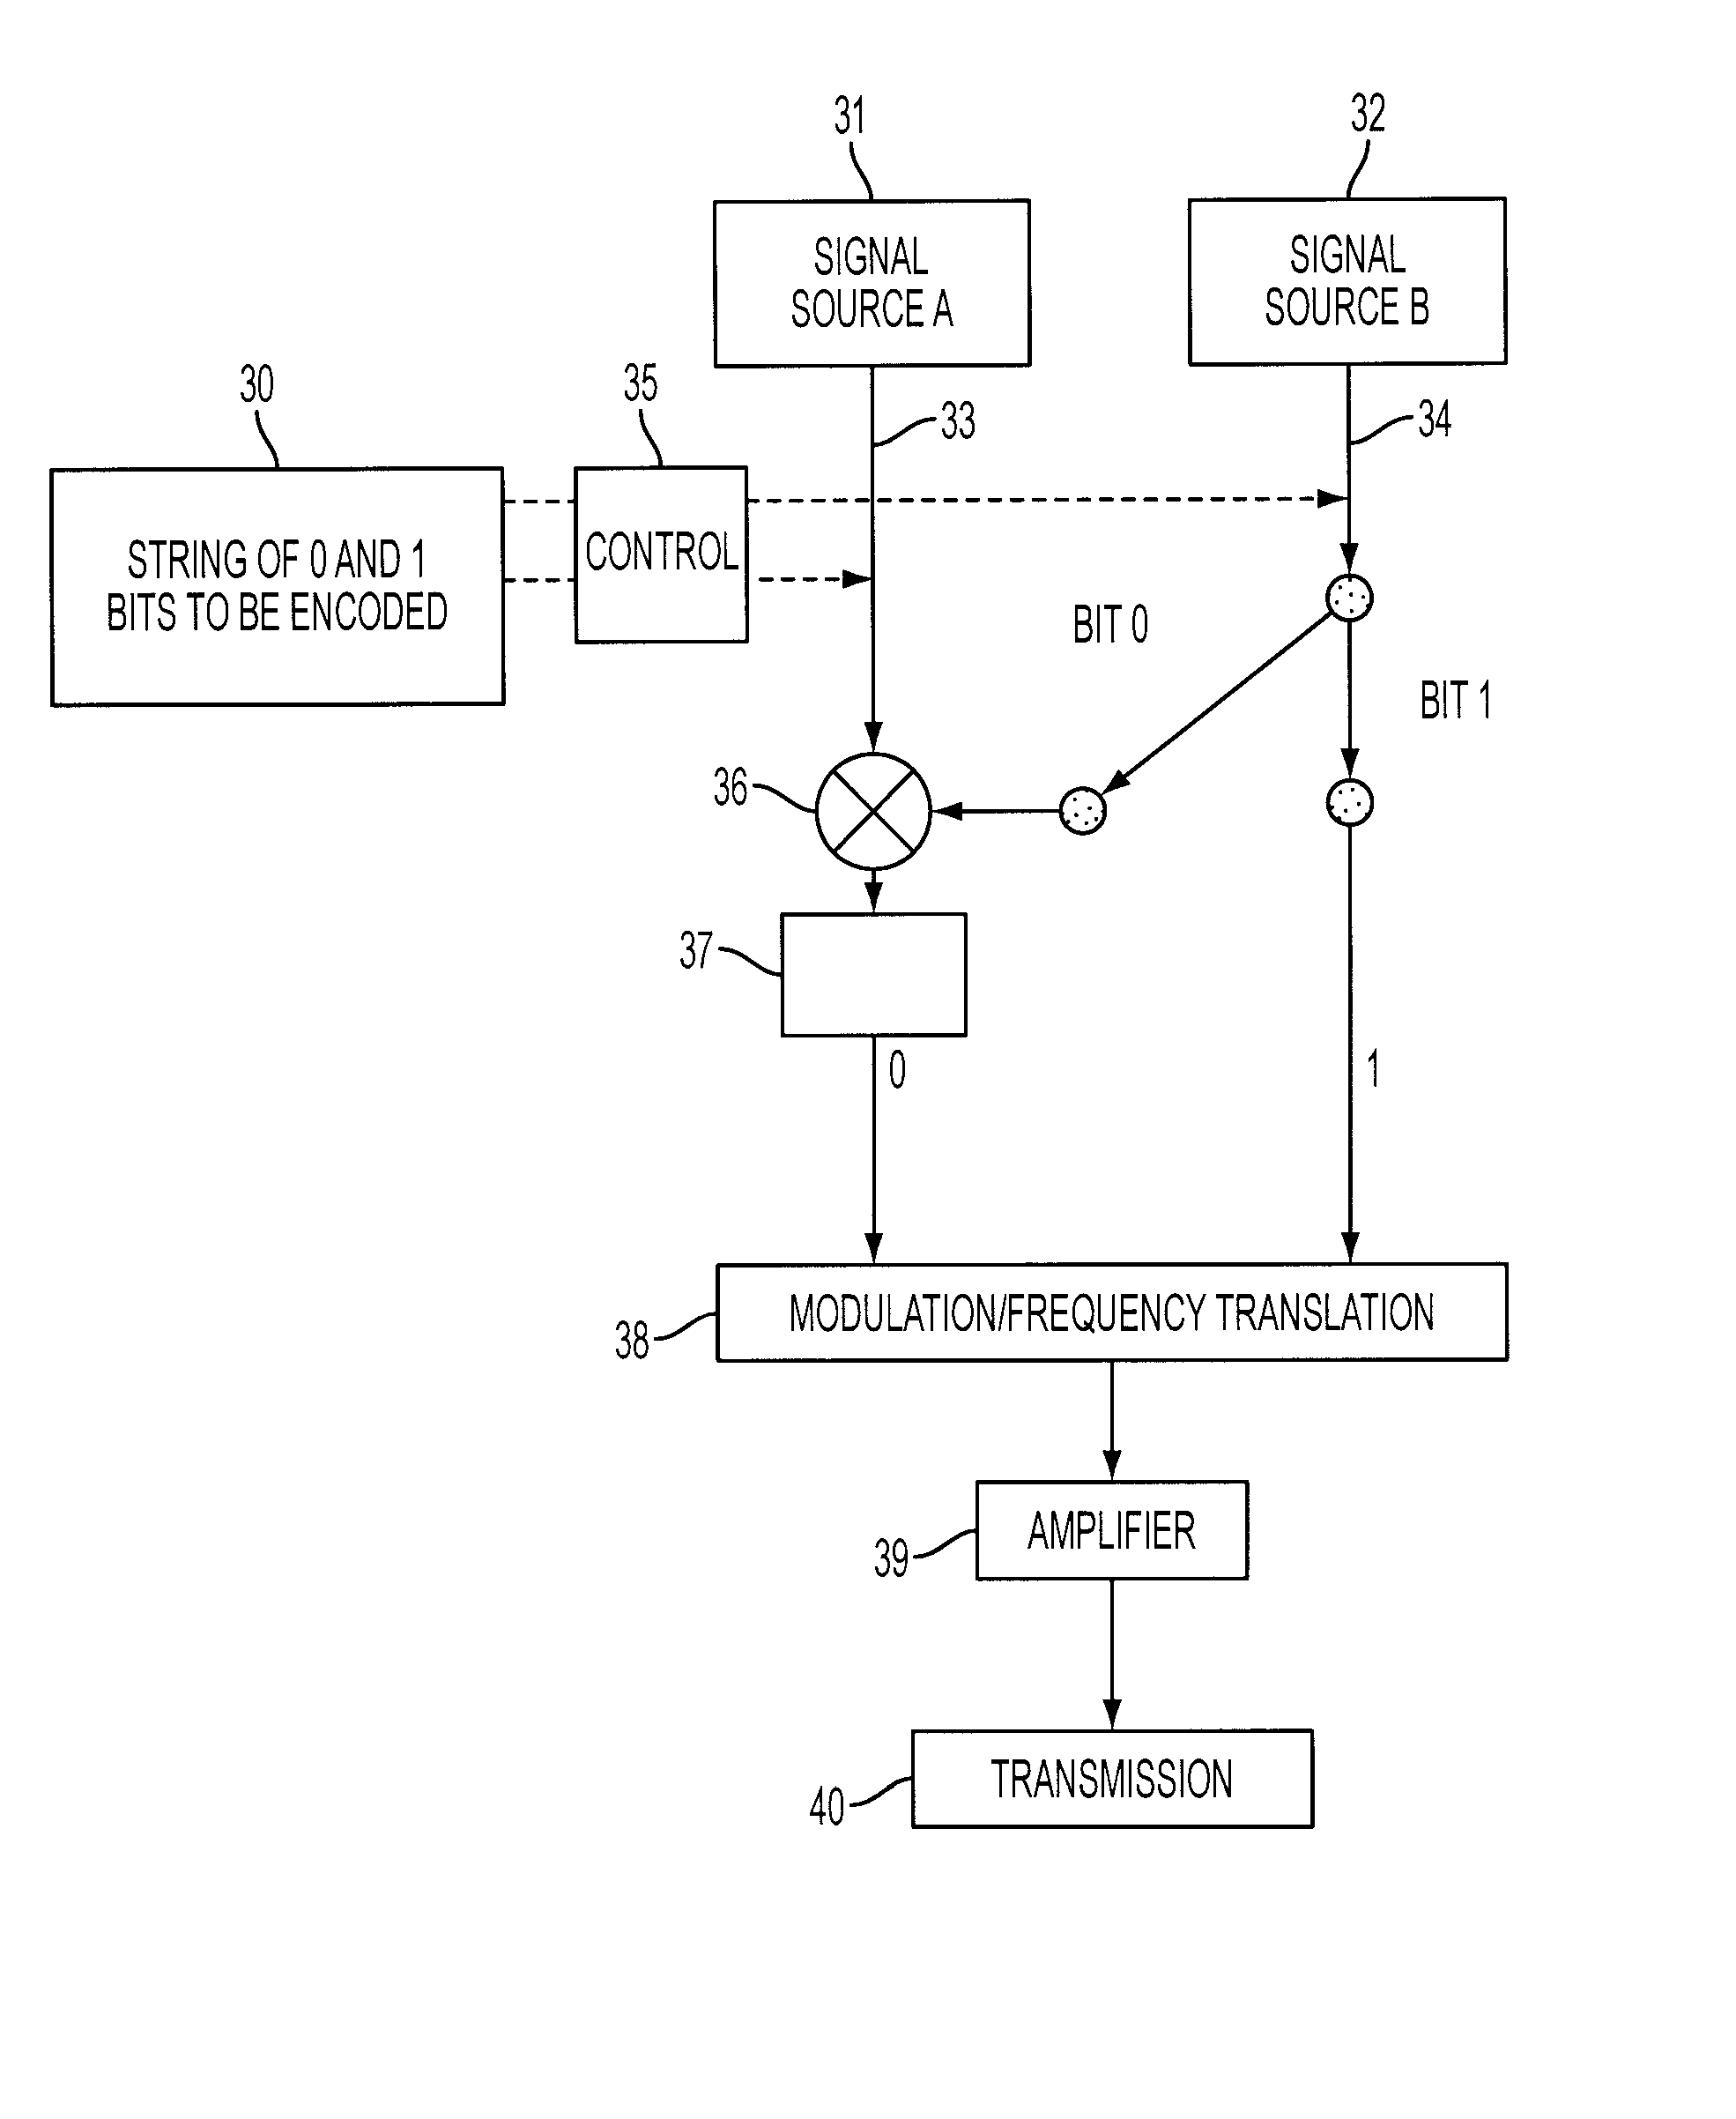 Method and Apparatus for Secure Digital Communications Using Chaotic Signals